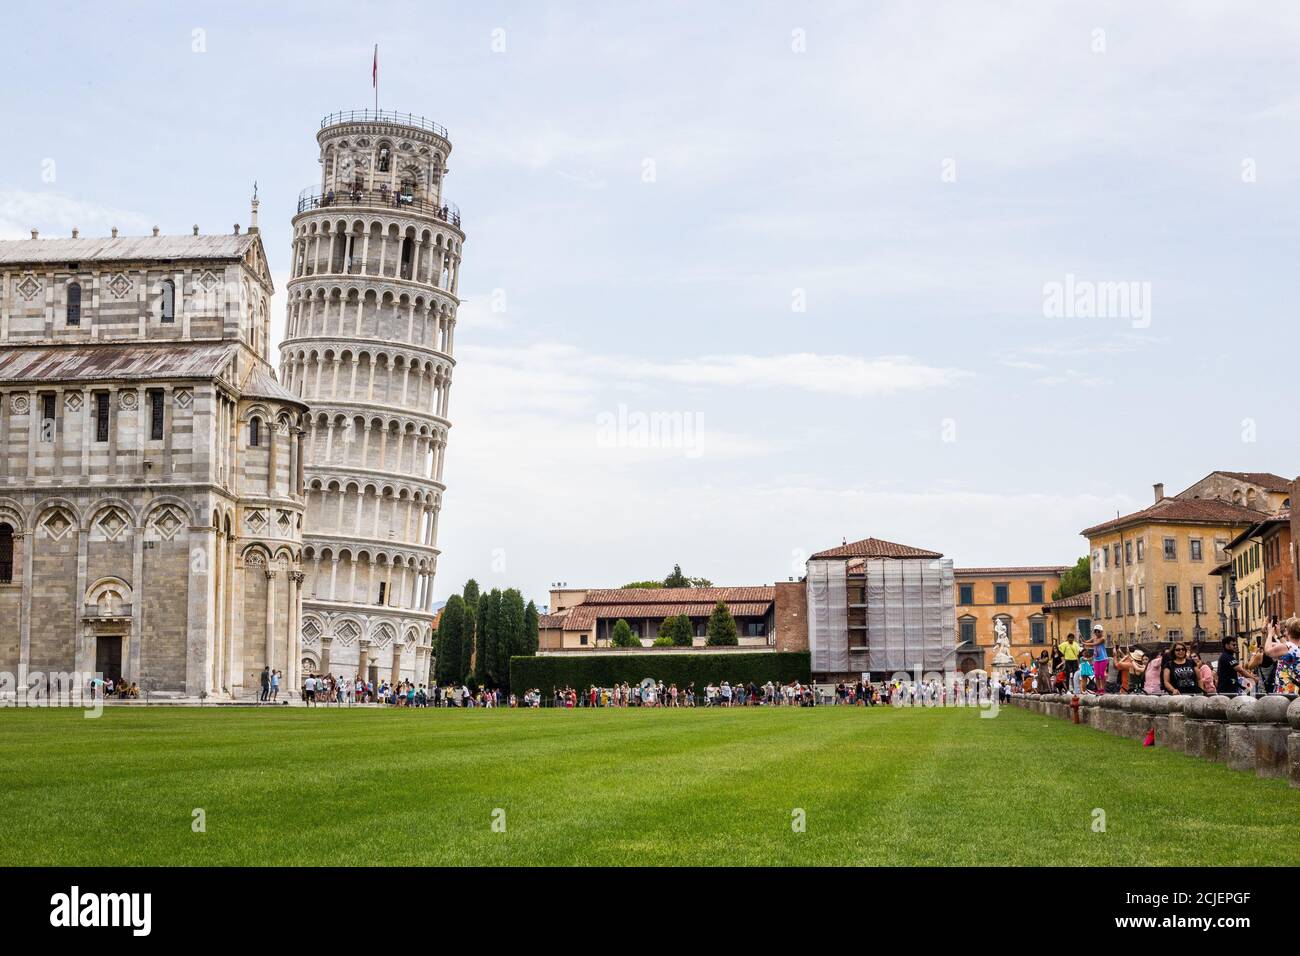 Pisa, Italy - July 9, 2017: View of Tourists, Pisa Cathedral and Leaning Tower in Piazza dei Miracoli Stock Photo